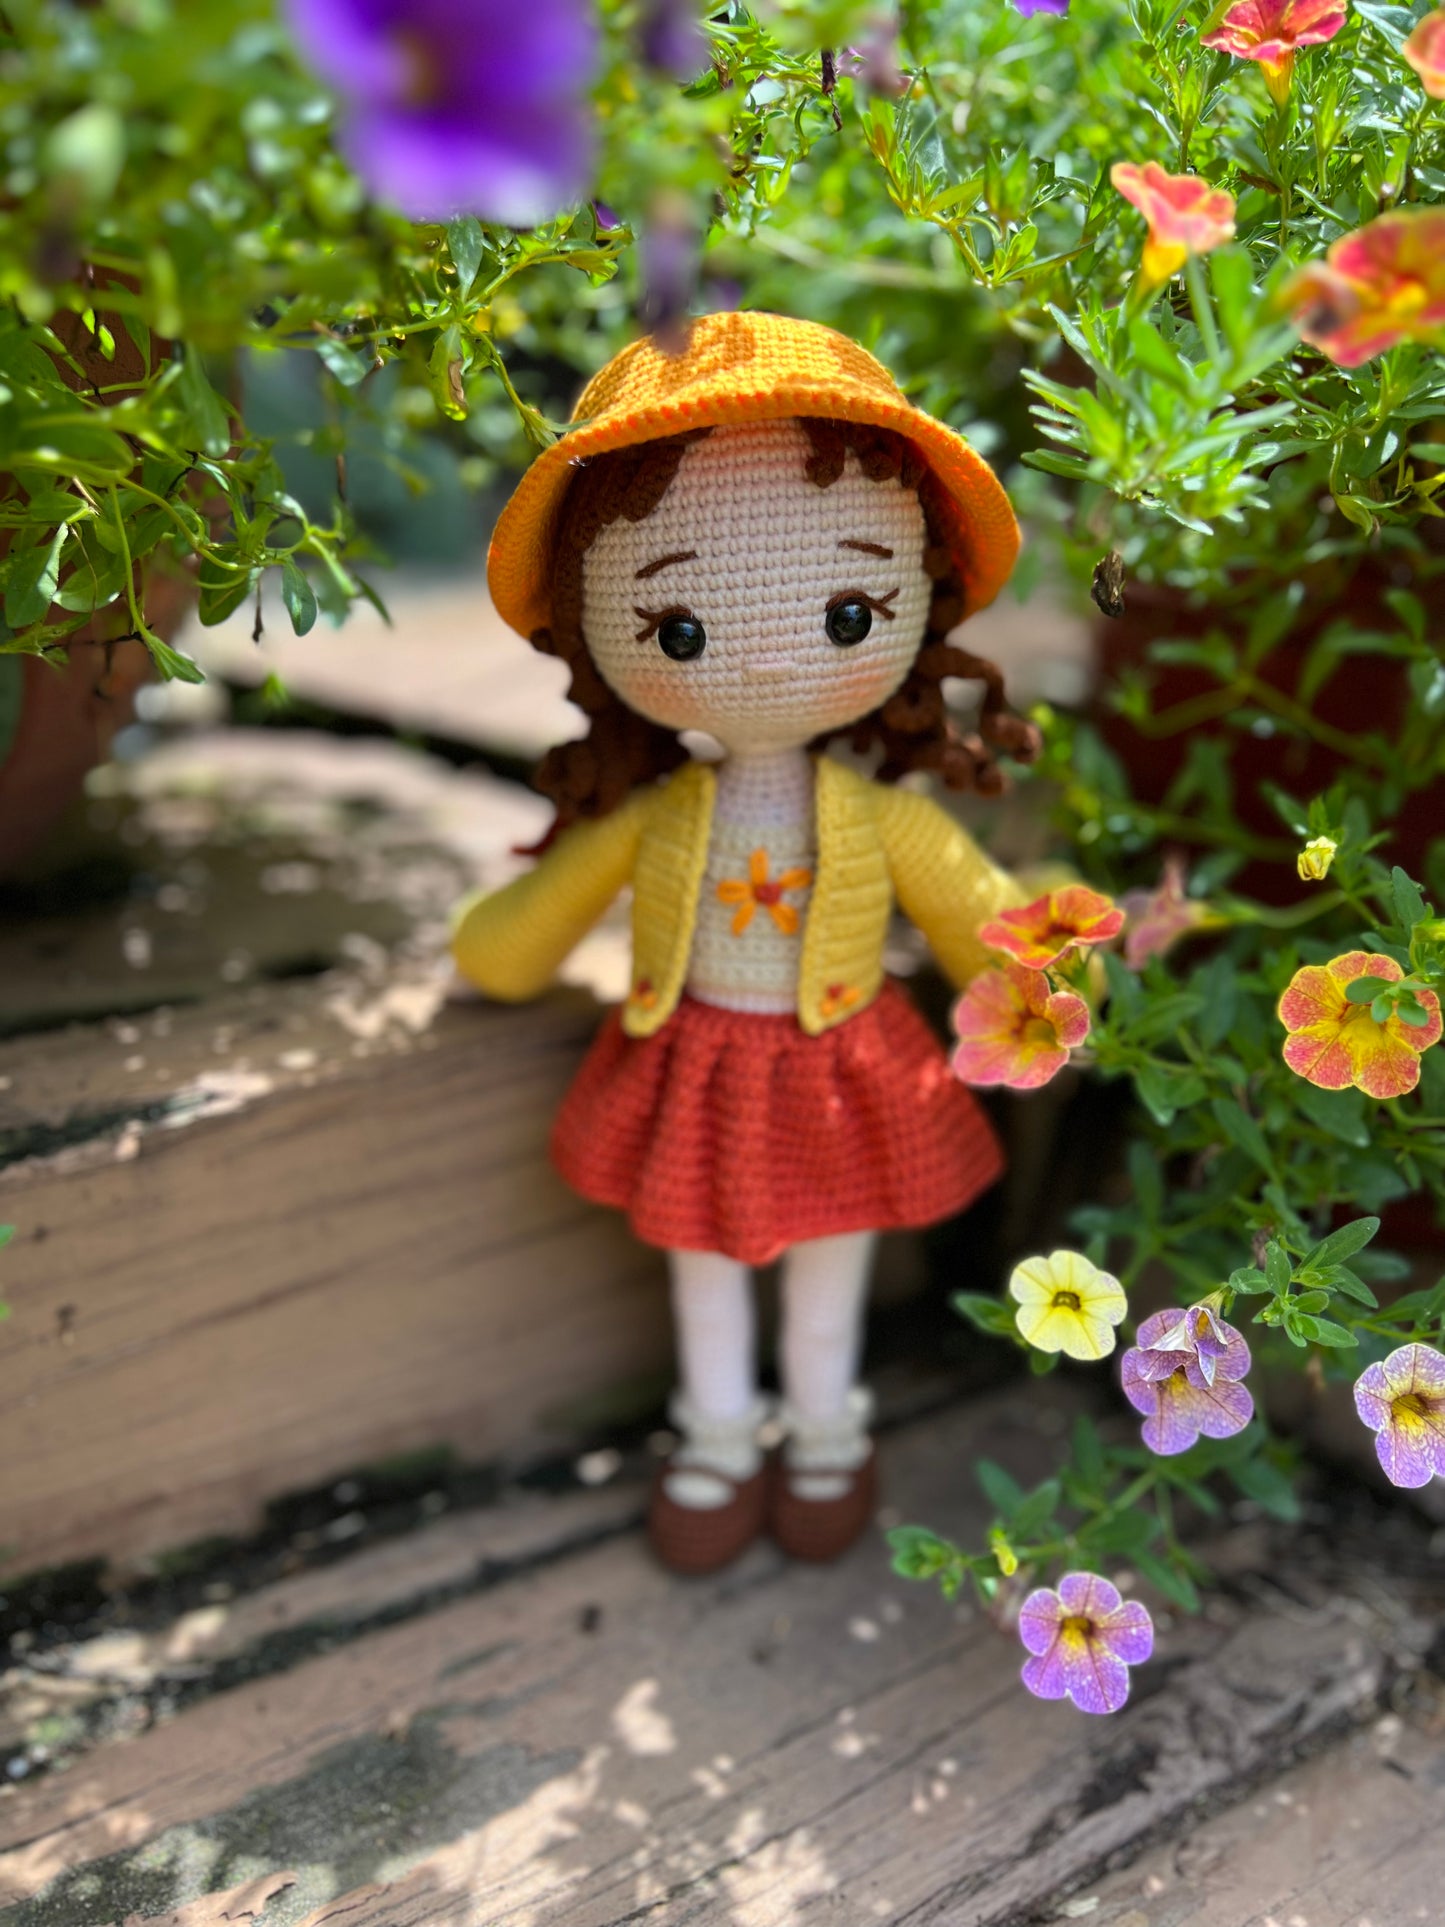 Girl With Orange Hat Amigurumi Doll, Handmade Knitted, Crochet Doll, Kids Gifts, Collectible Handmade Plushies, Unique Nursery Decor